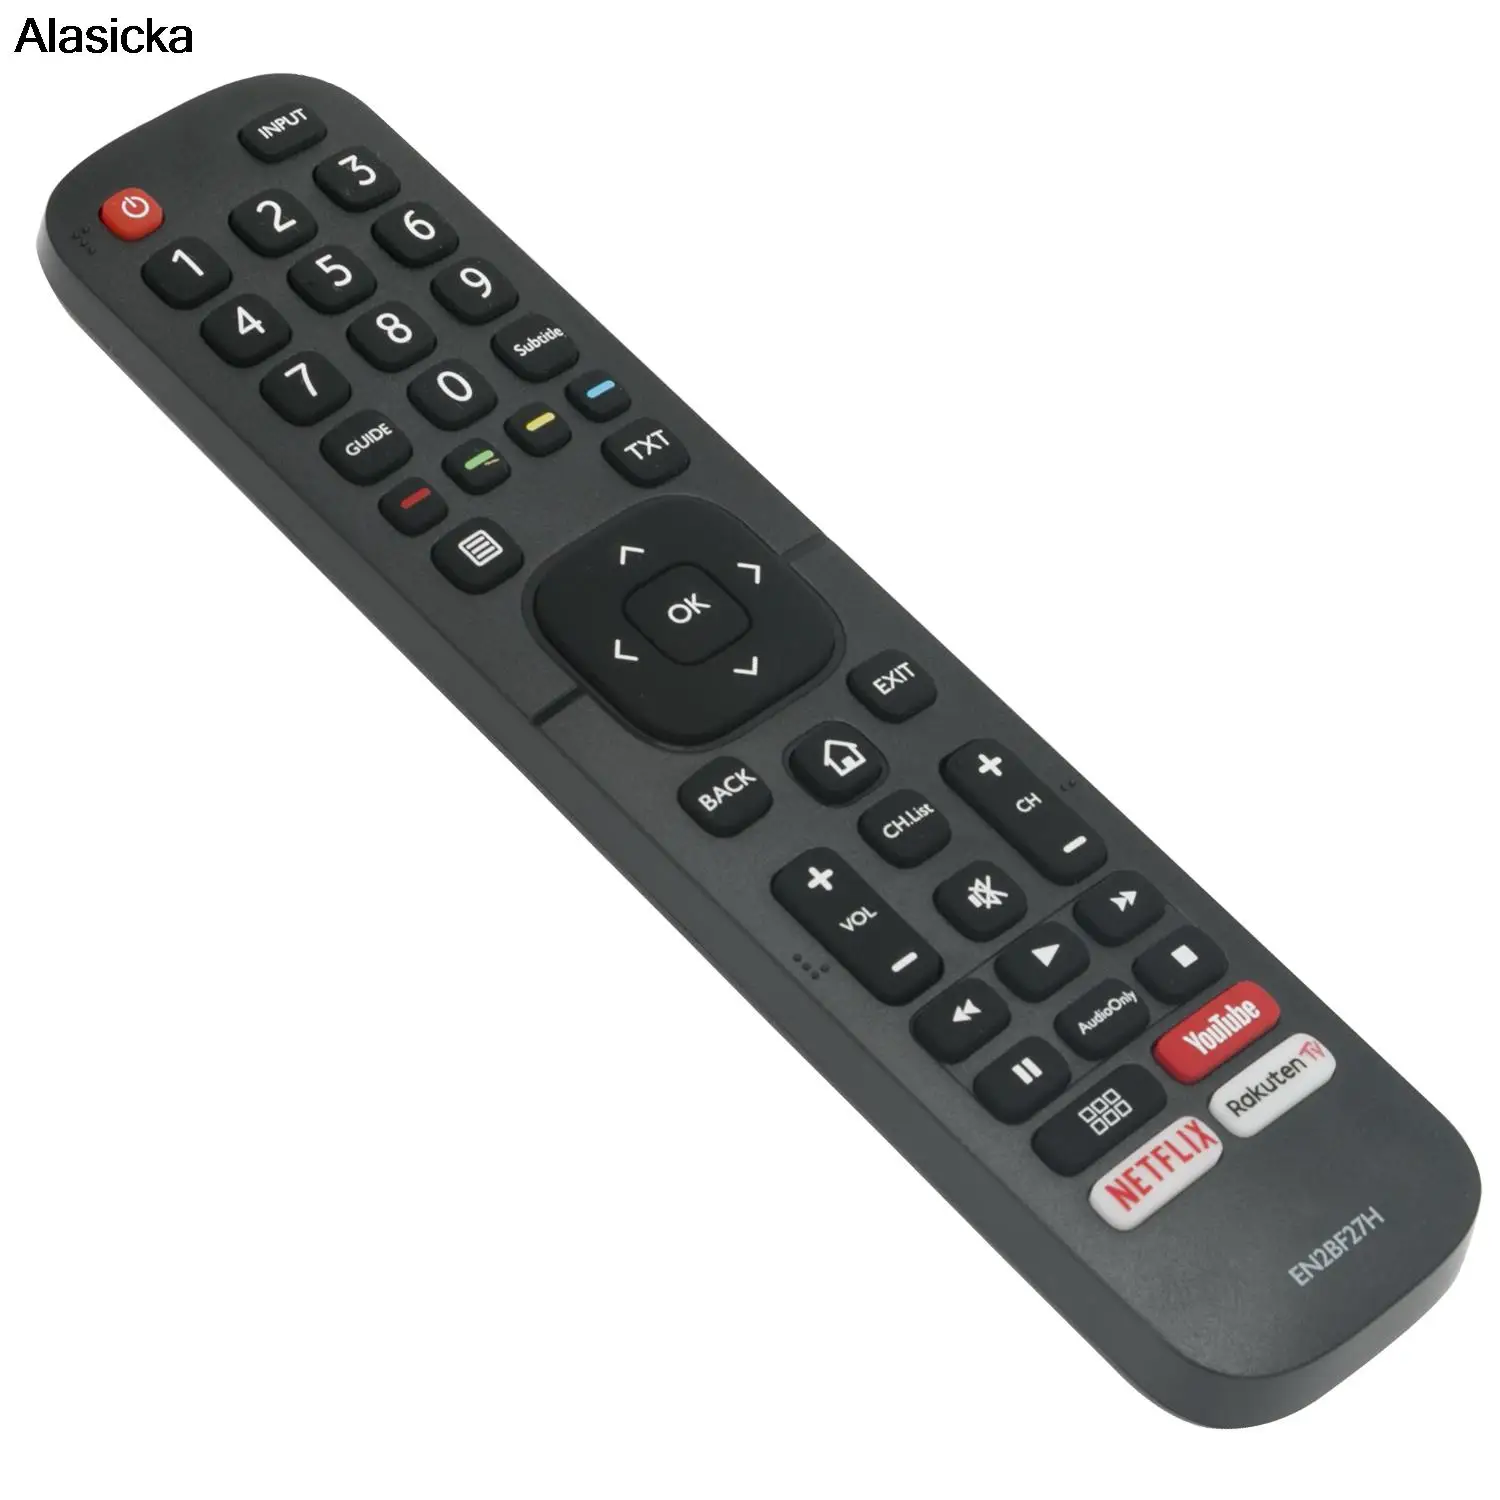 Remote Control EN2BF27H for Hisense Led Lcd for Smart 4K TV Use for H50AE6030 H50A6140 H58AE6000 H55AE6000 H43A6140 H43AE603